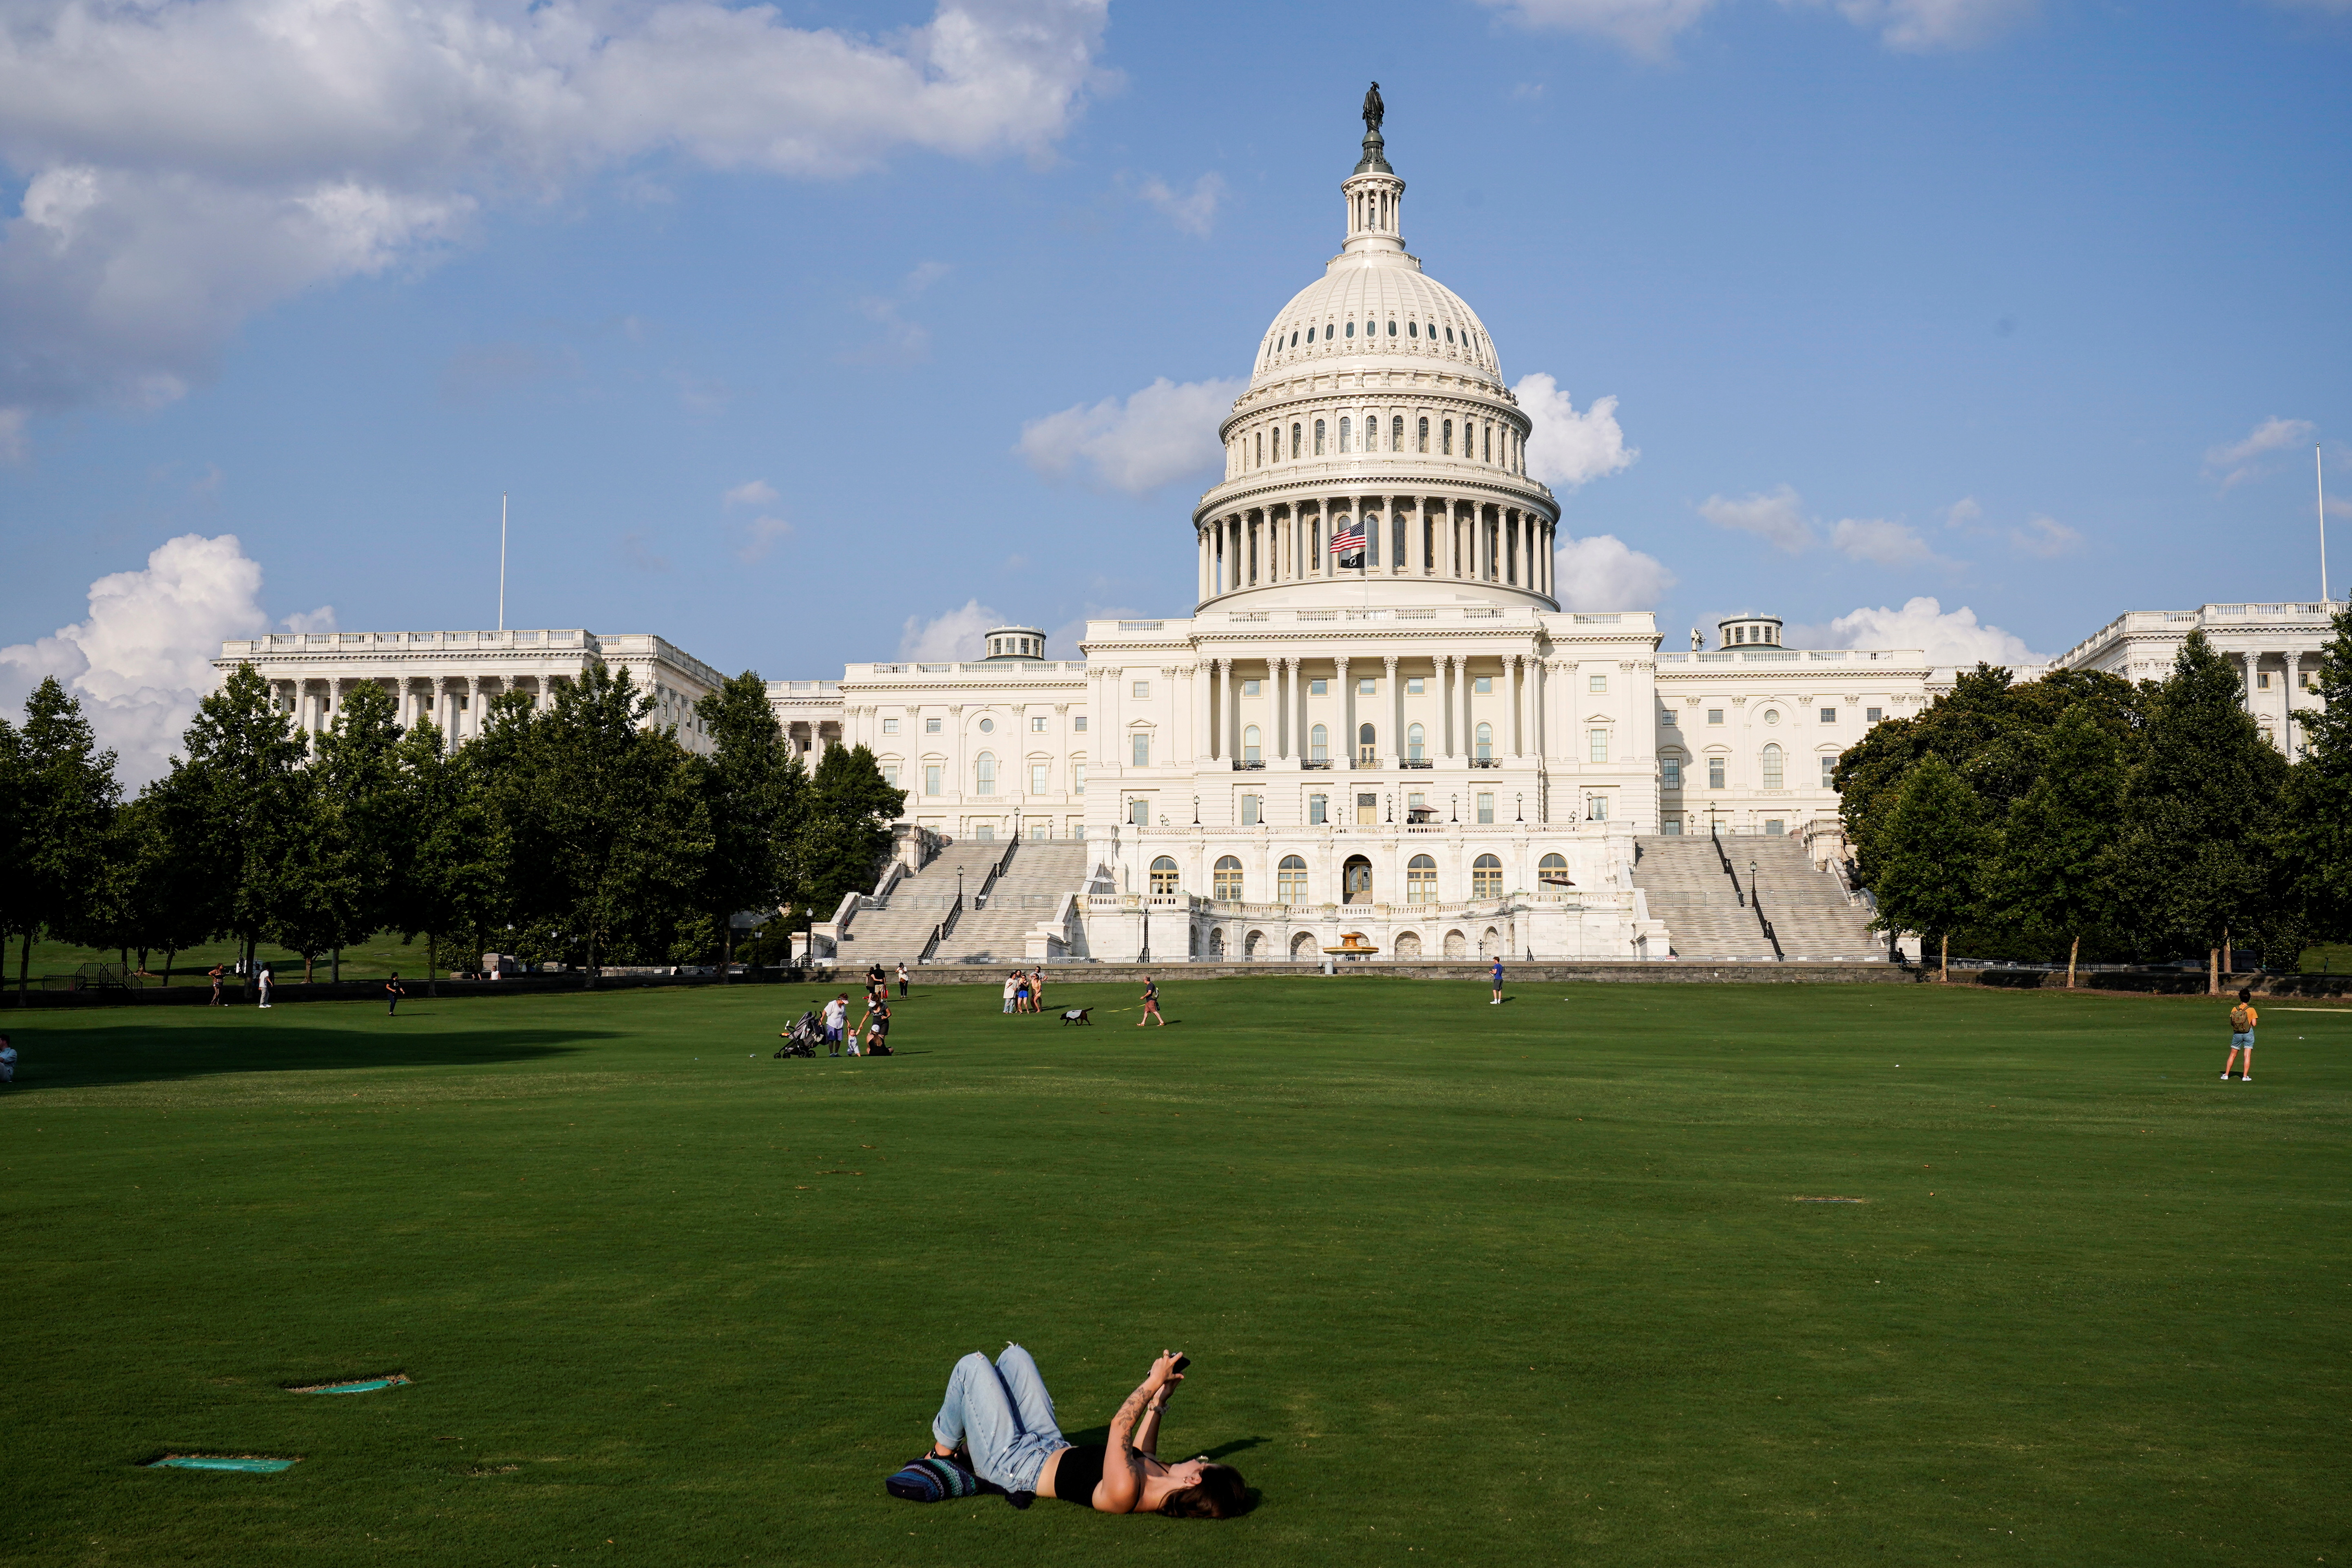 People gather on a lawn at the U.S. Capitol in Washington